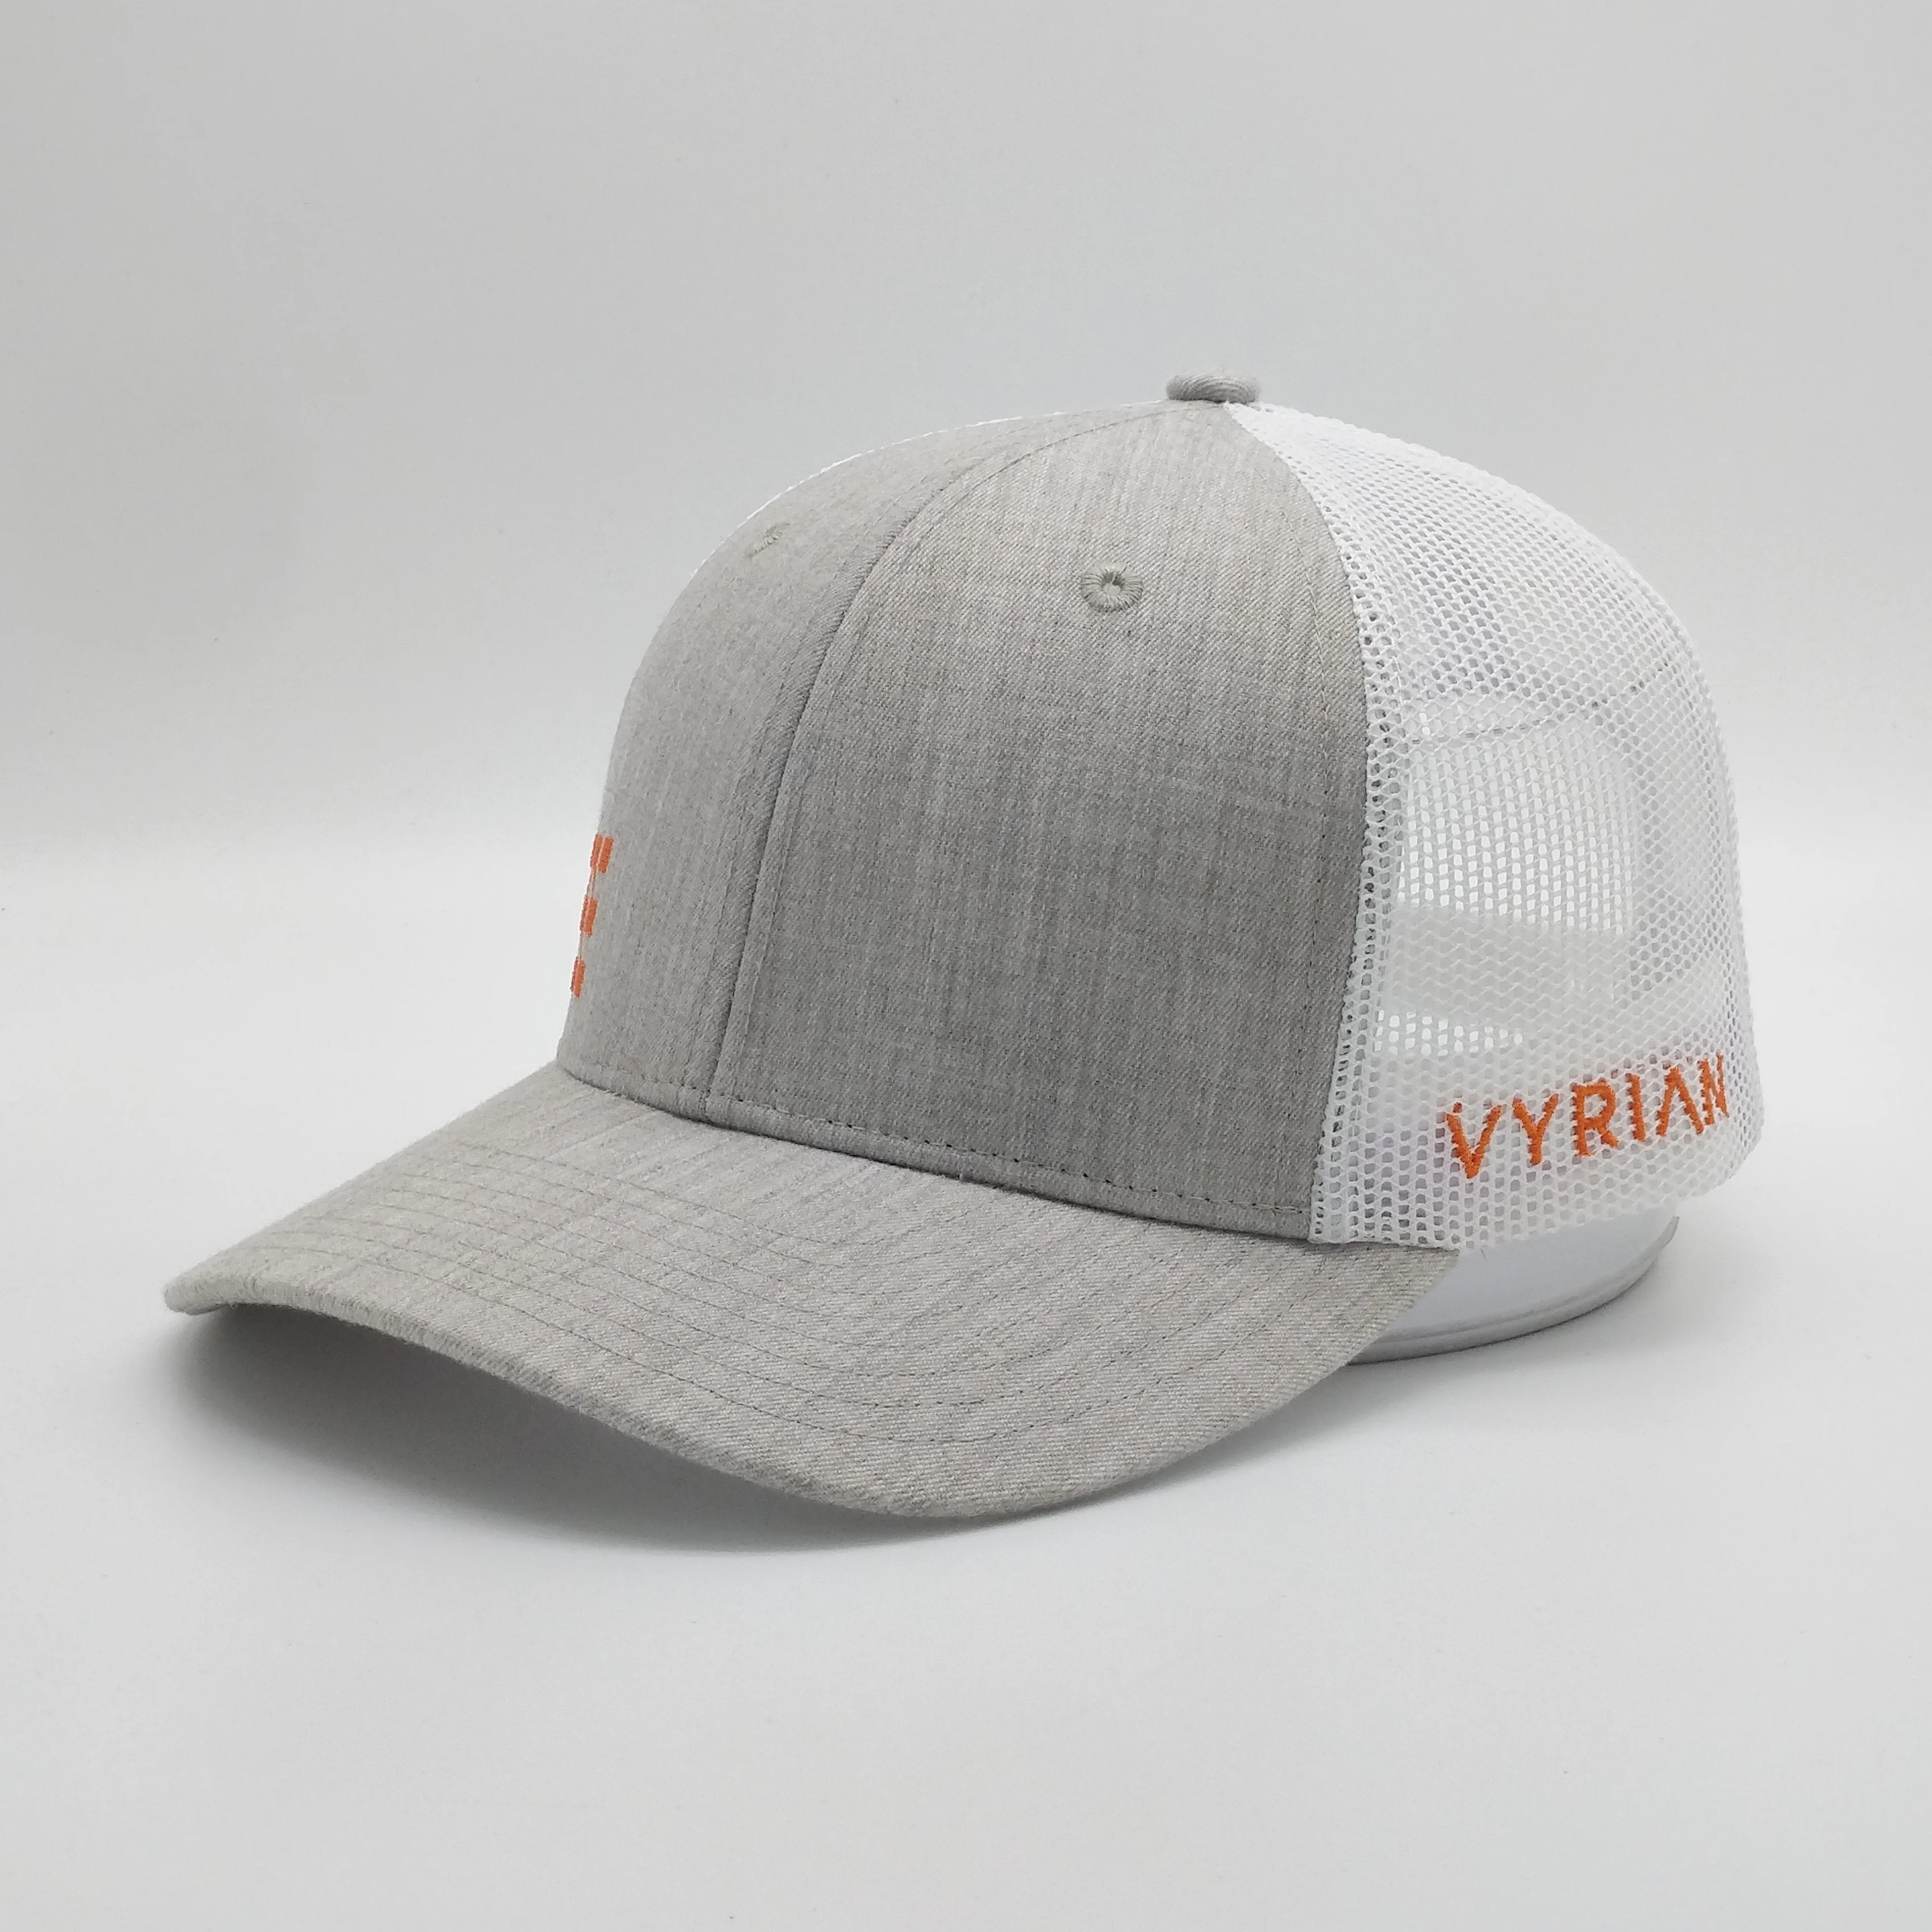 Wholesale Custom Logo High Quality 6 Panel Mens Low Profile Heather Grey Embroidered Trucker Hats Cap